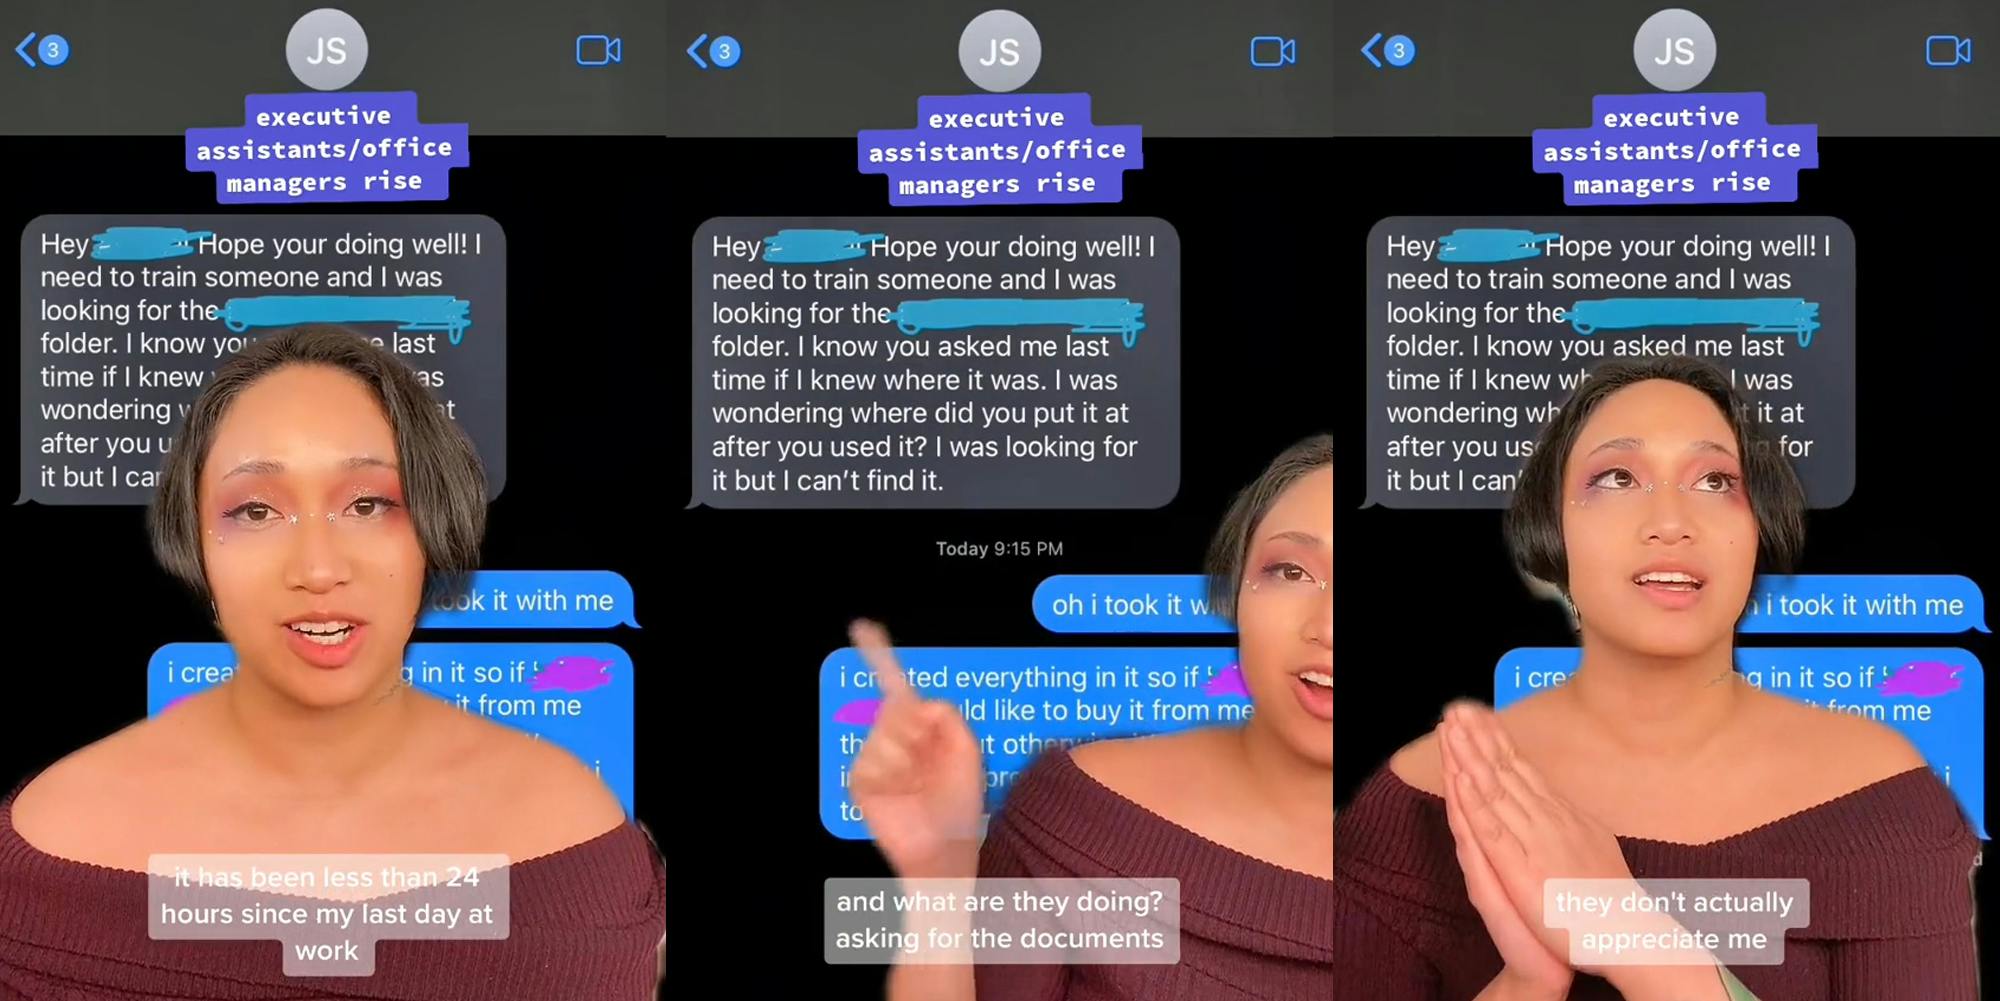 woman greenscreen TikTok over text messages caption "executive/assistants/office managers rise" "it has been less than 24 hours since my last day at work" (l) woman greenscreen TikTok over text messages "Hey Hope your dong well! I need to train someone and I was looking for the folder. I know you asked me last time if I knew where it was. I was wondering where did you put it after you used it? I was looking for it but can't find it." "caption "executive/assistants/office managers rise" "and what are they doing? asking for the documents" (c) woman greenscreen TikTok over text messages caption "executive/assistants/office managers rise" "they don't actually appreciate me" (r)